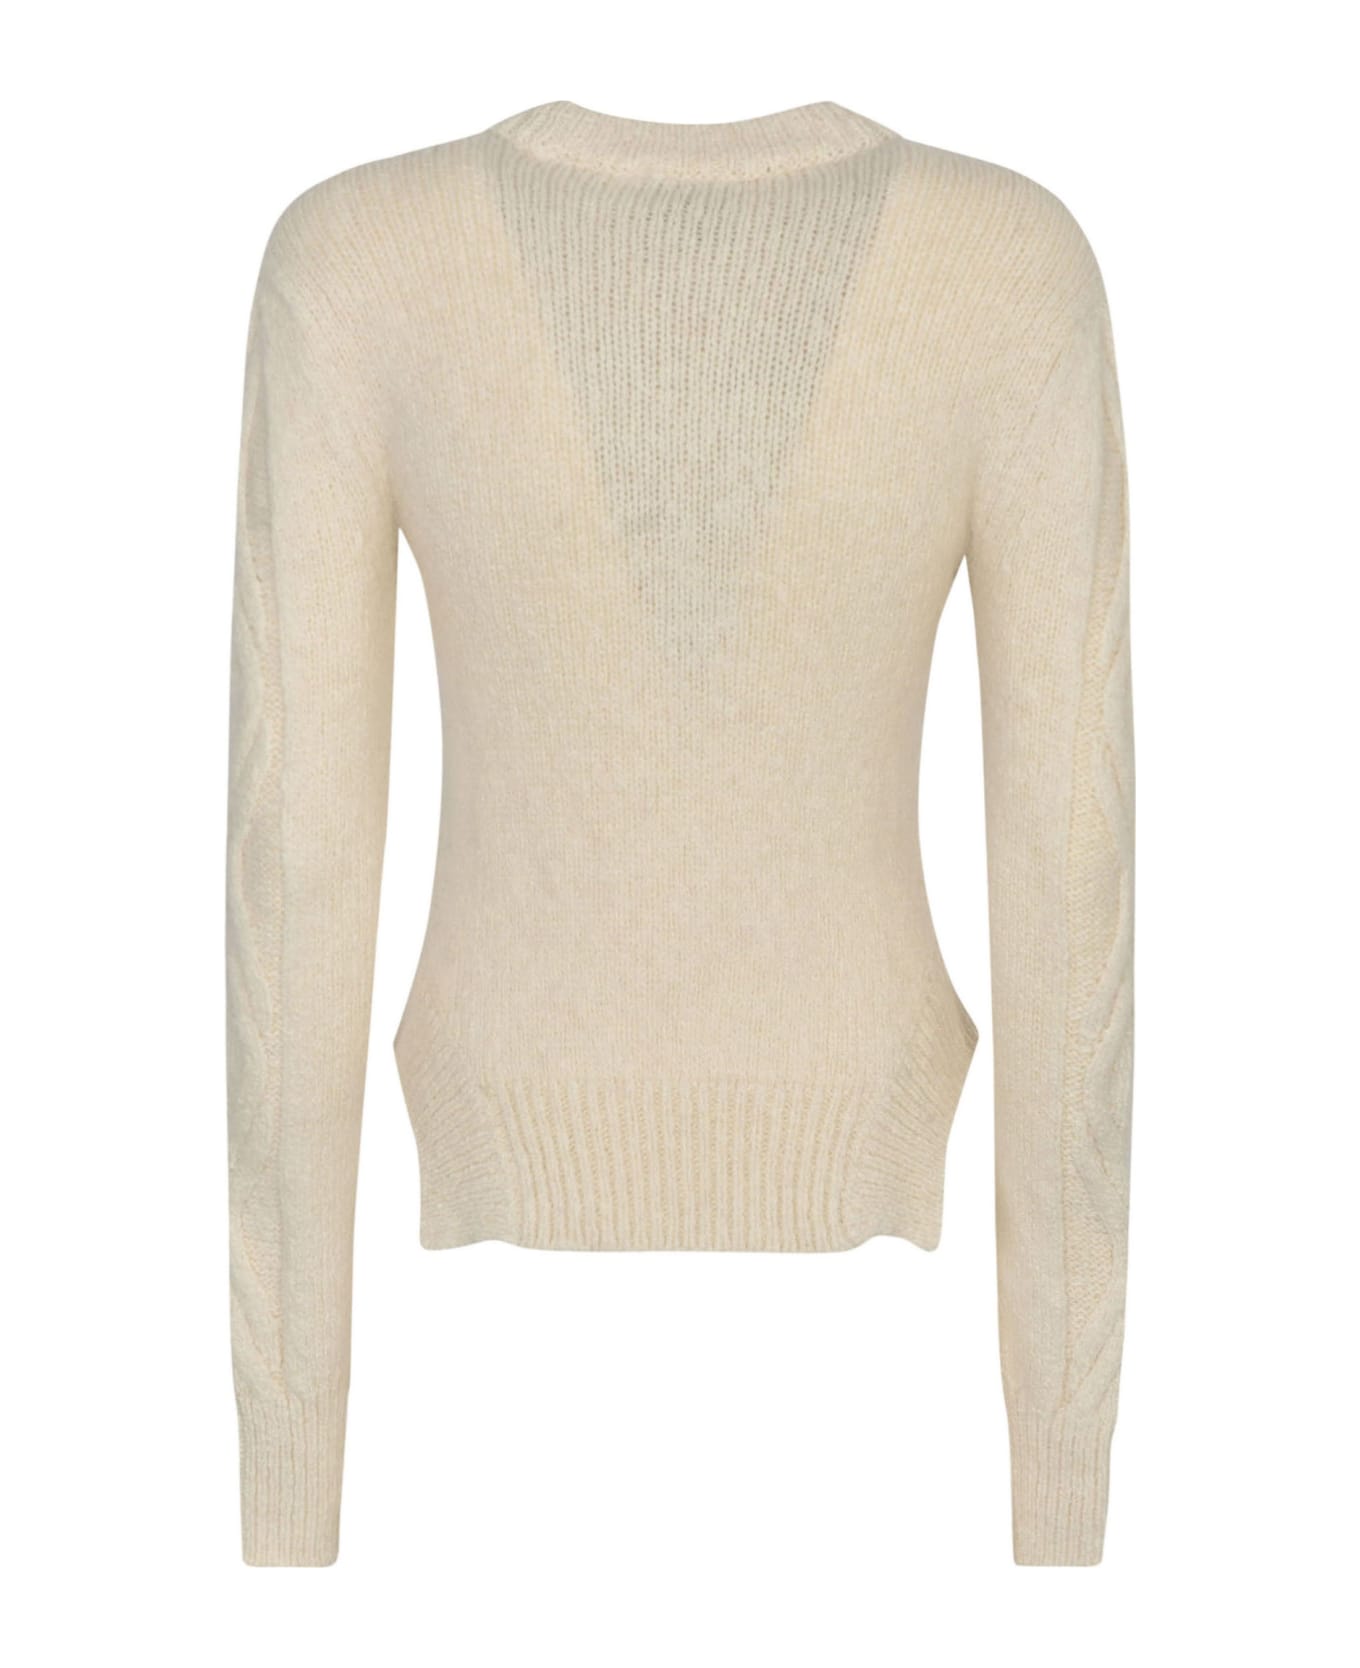 Isabel Marant Knitted Ribbed Dress - Beige